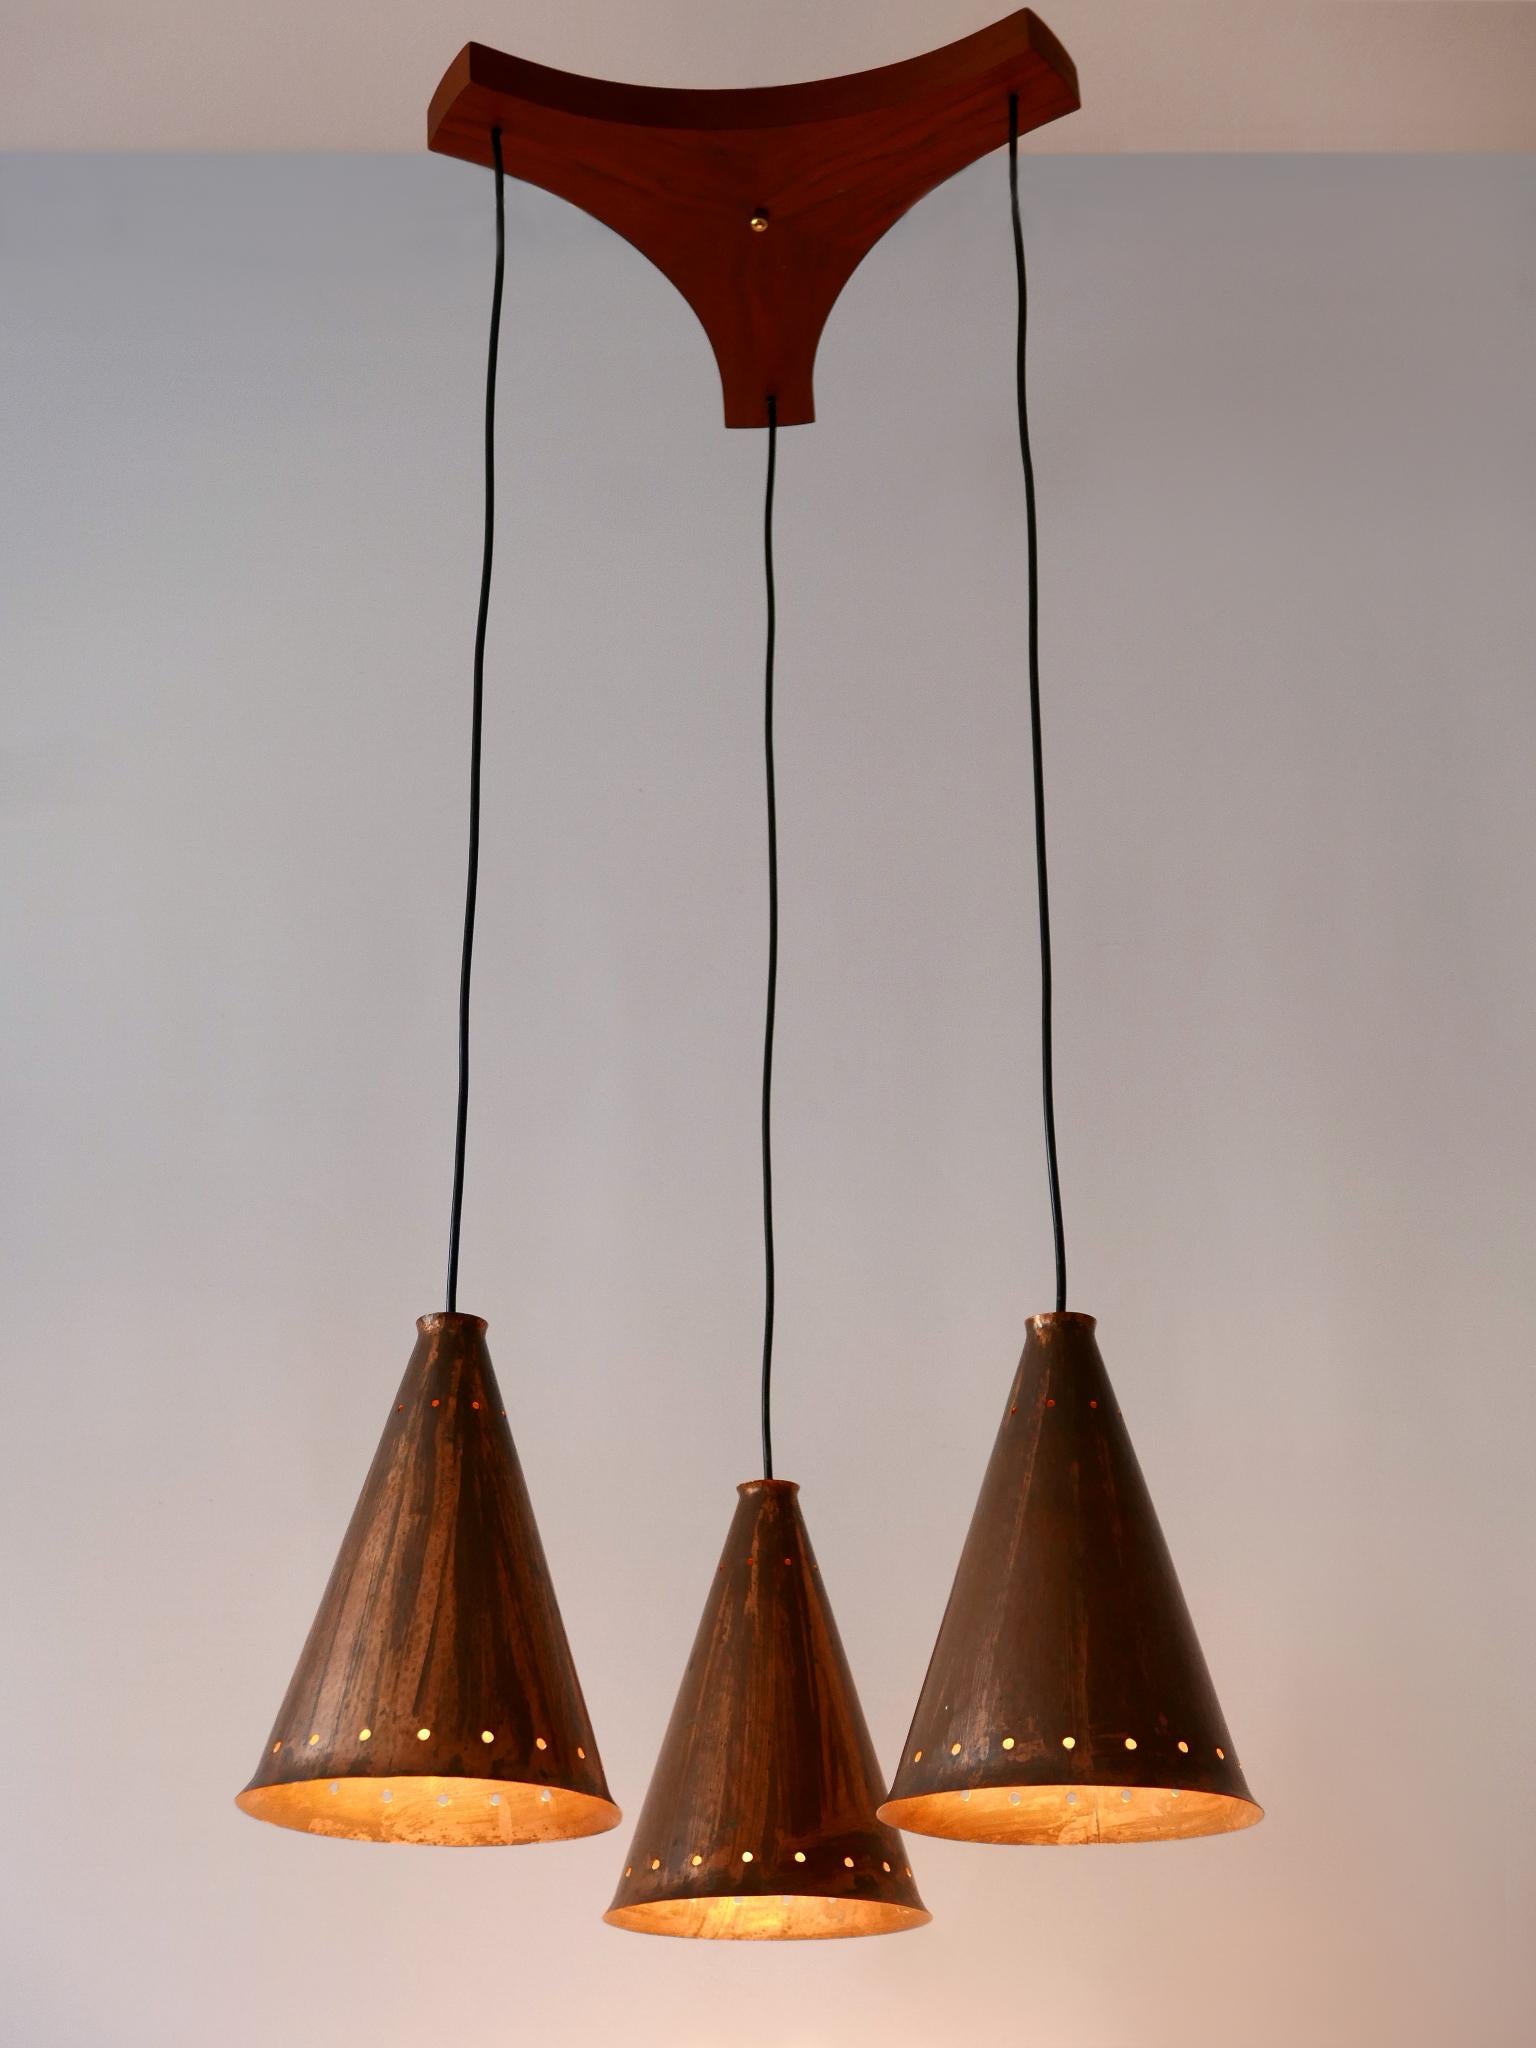 Exceptional & Large Mid-Century Modern Copper Pendant Lamp Scandinavia, 1950s For Sale 1